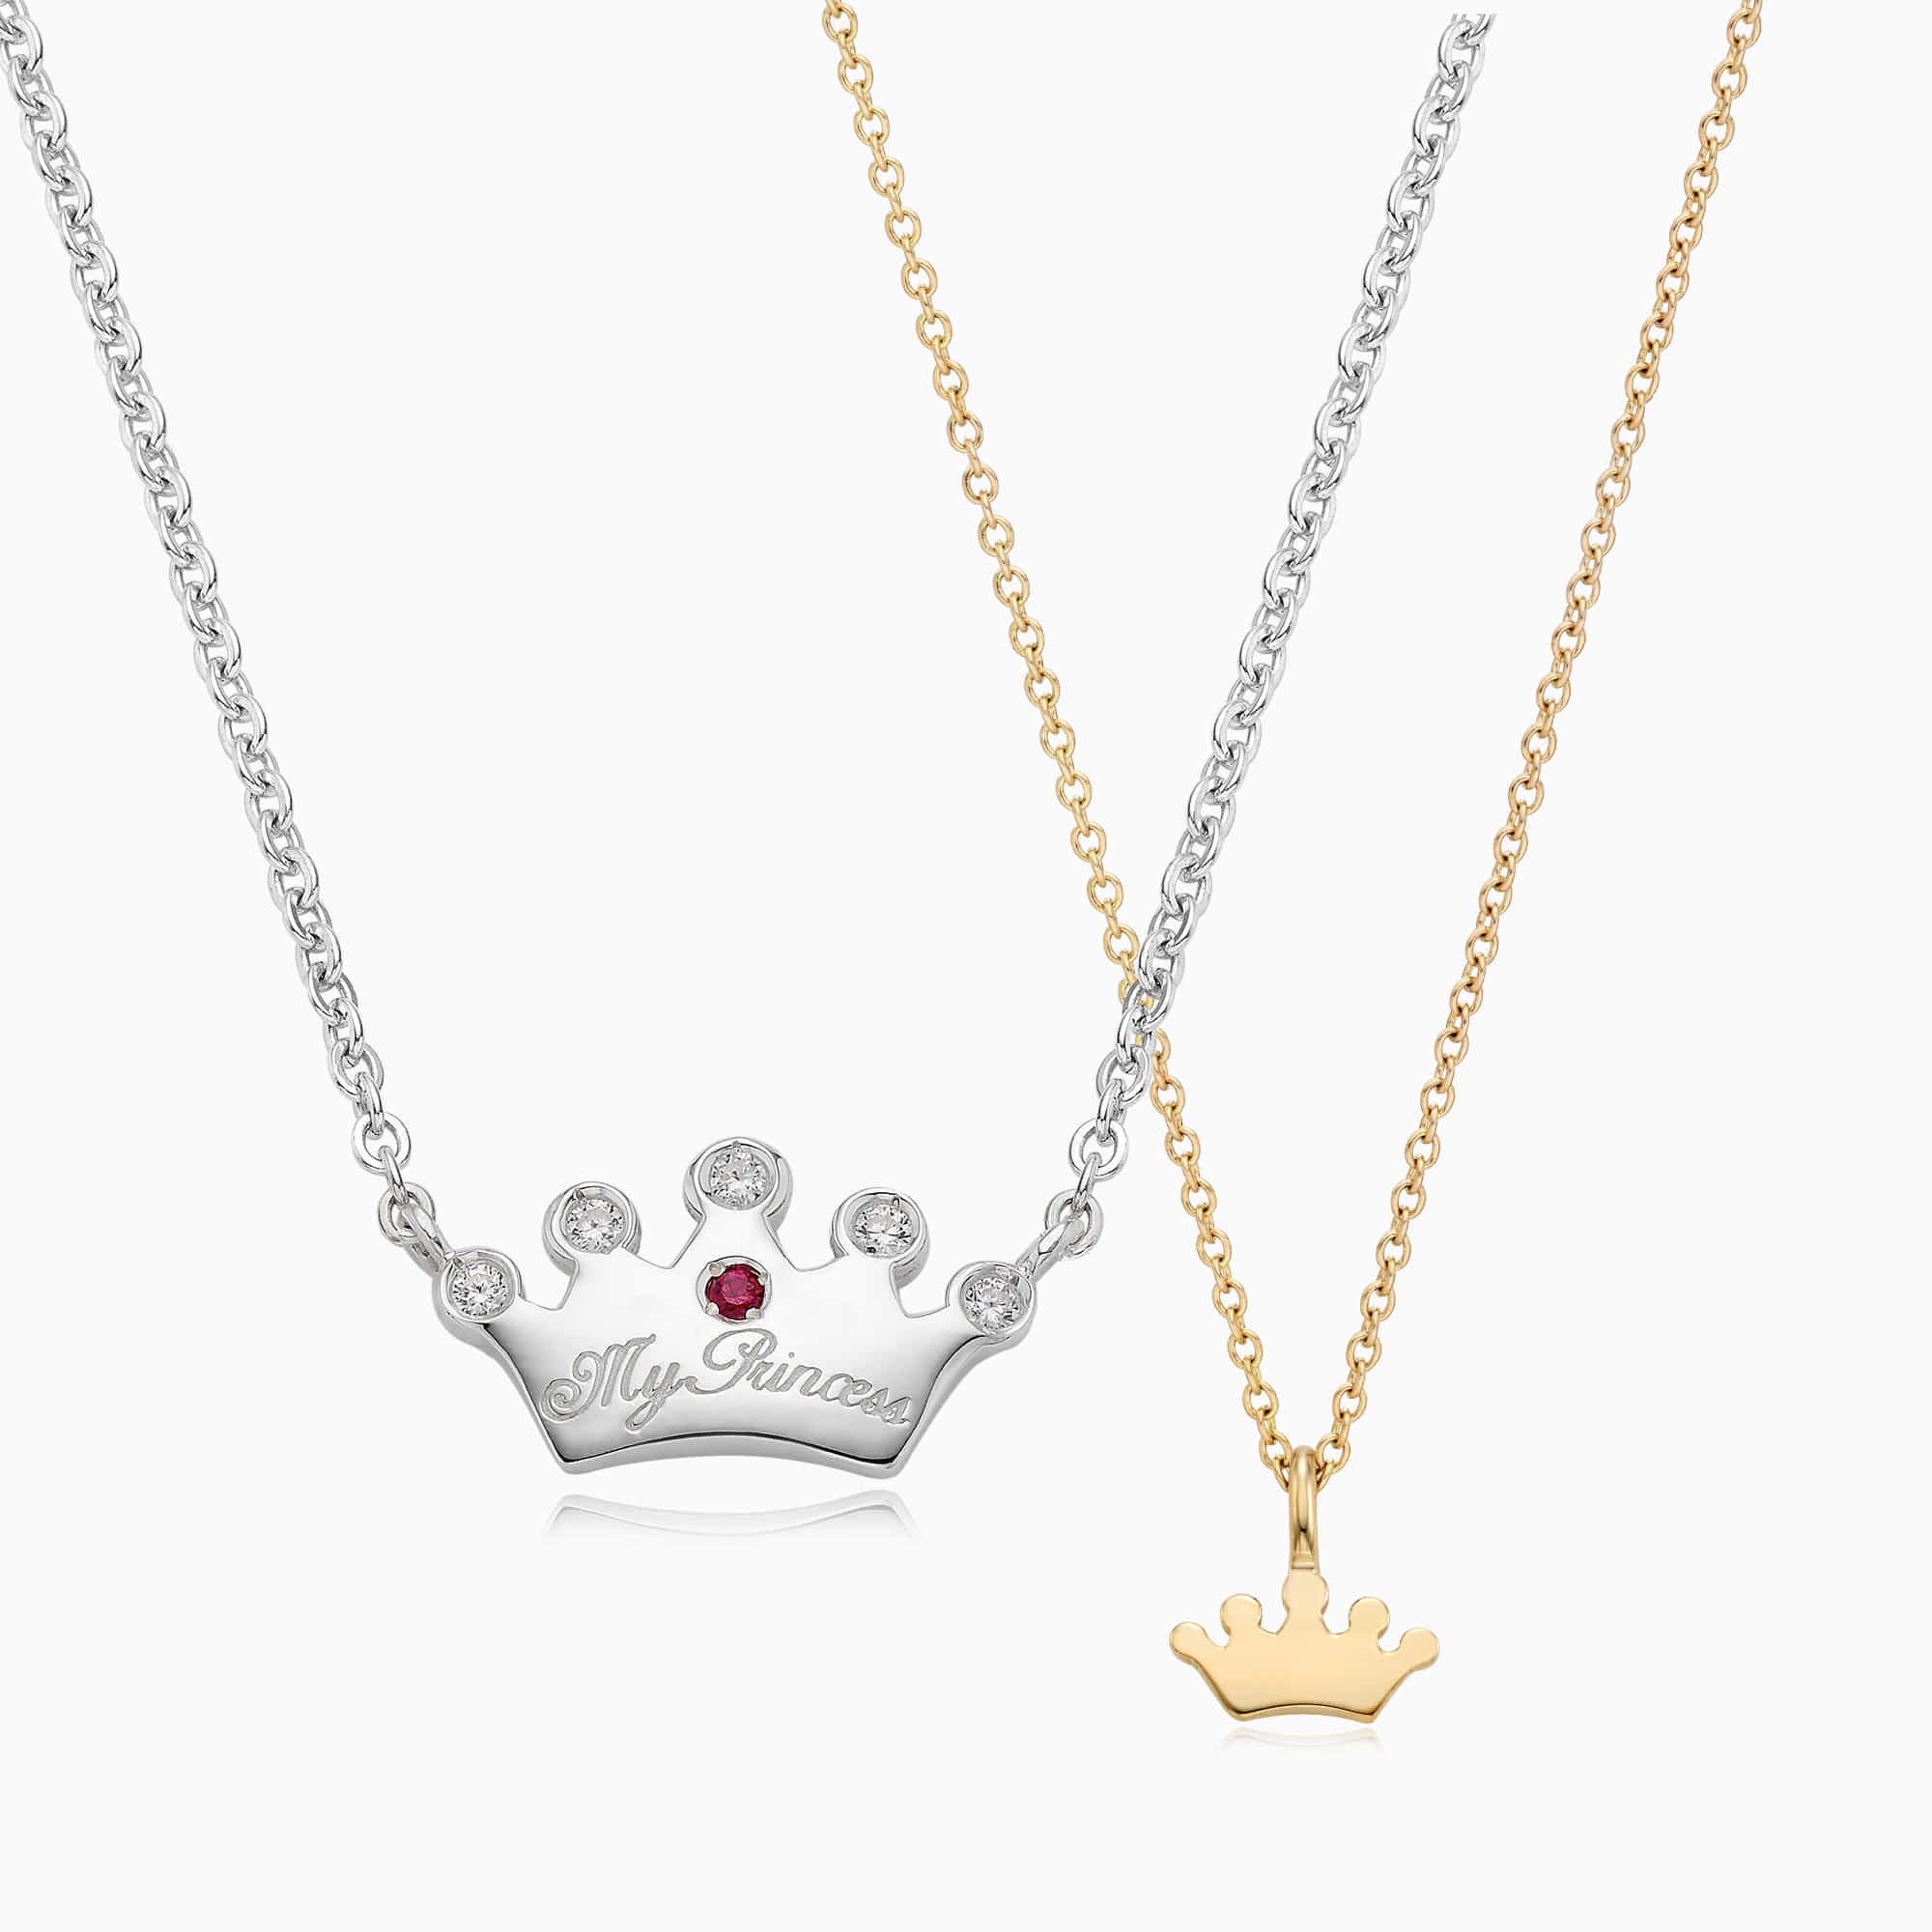 Mom and baby couple necklace - wish you the best Tiara